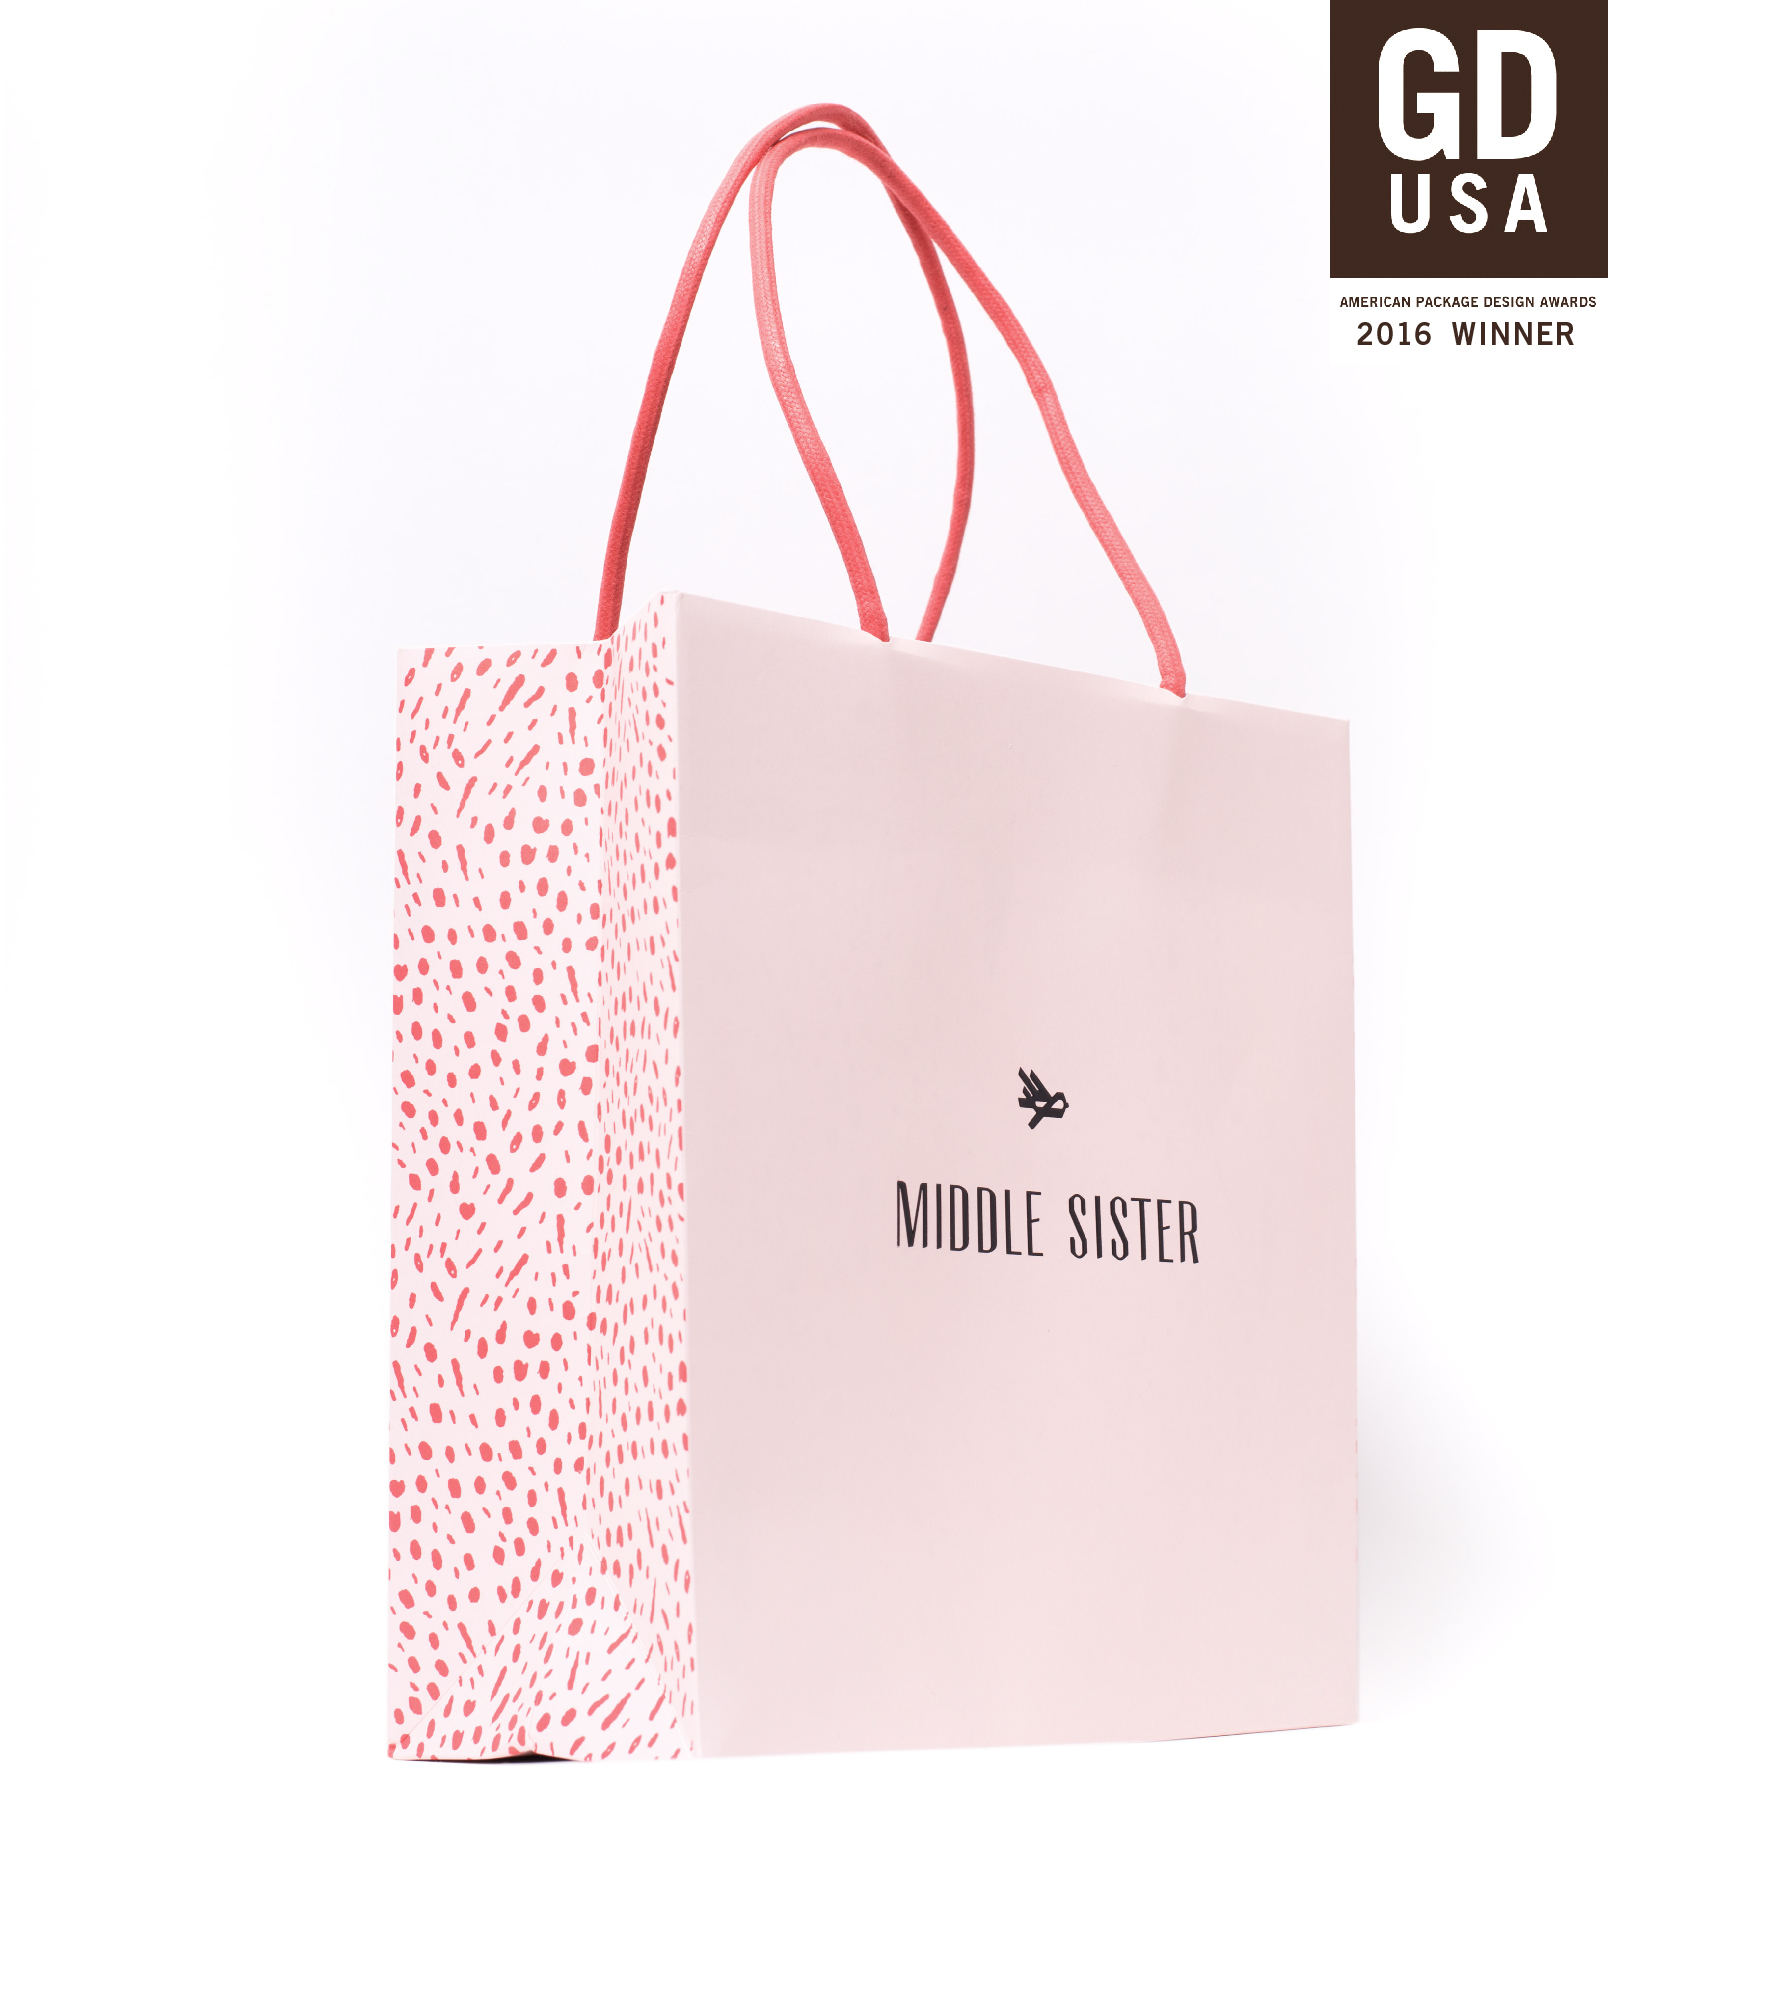 Award winning branding and packaging design for Middle Sister boutique. 